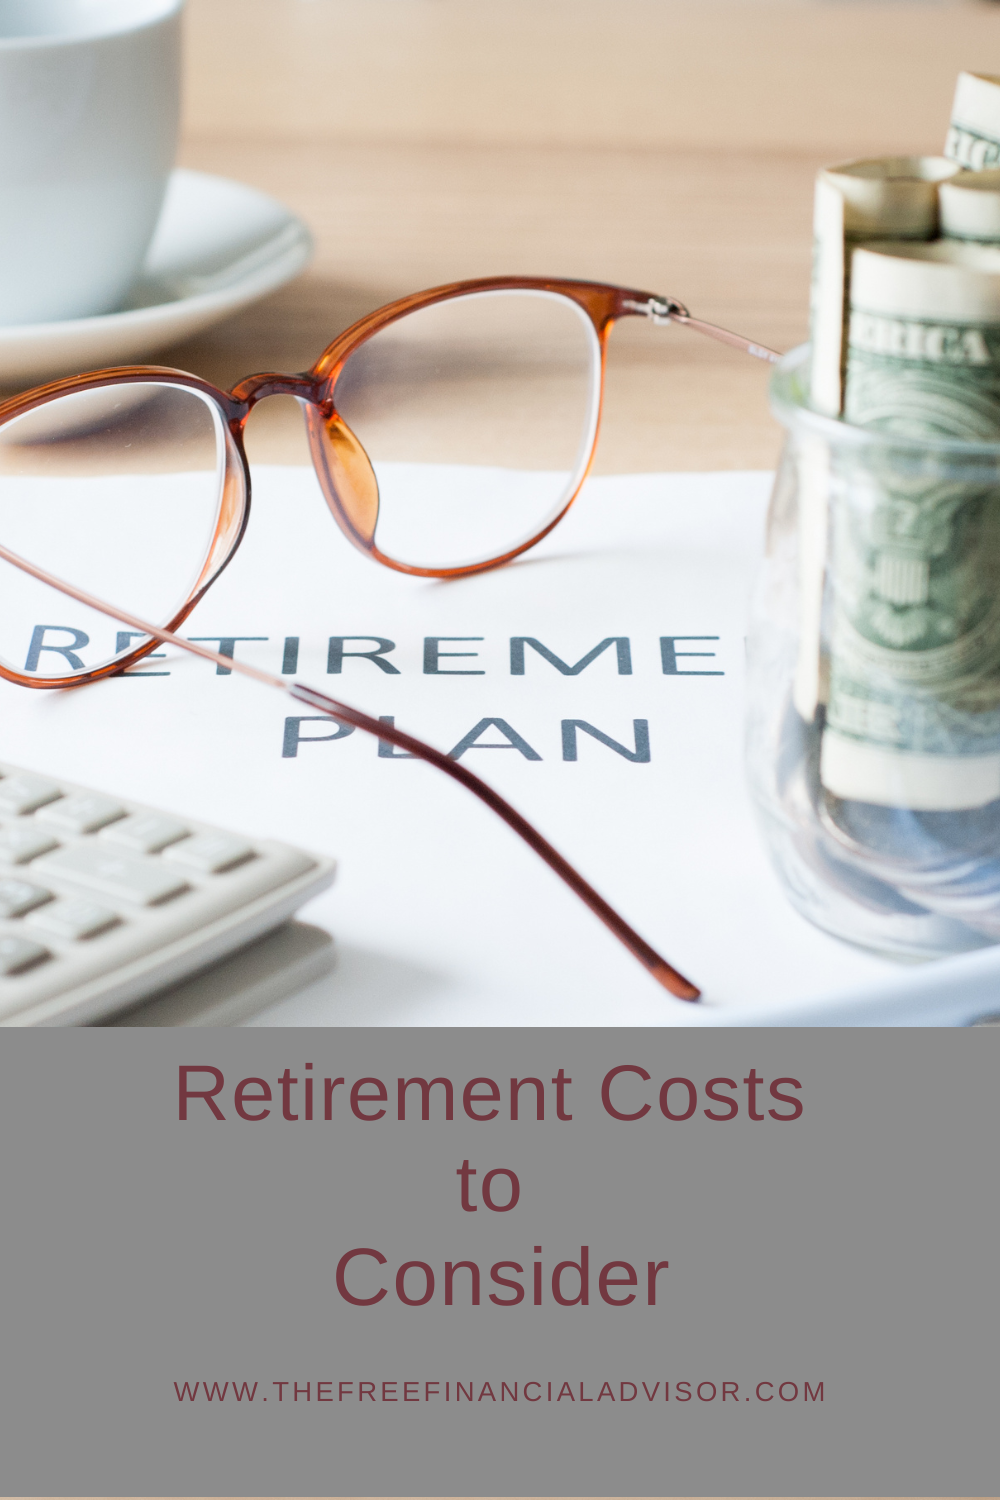 Retirement Costs to Consider